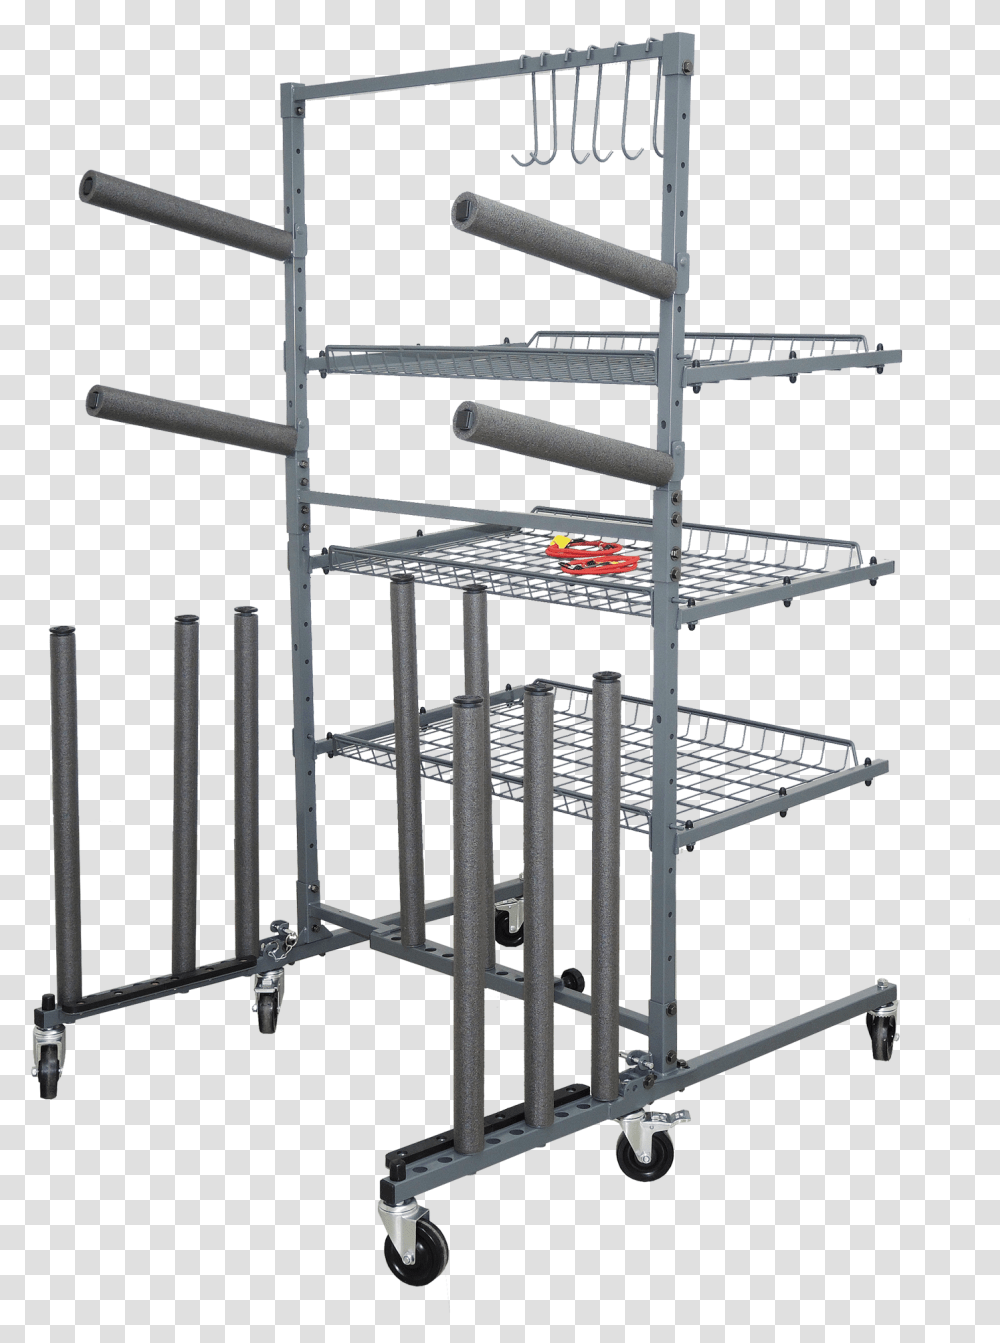 Shelf, Stand, Shop, Drying Rack, Utility Pole Transparent Png